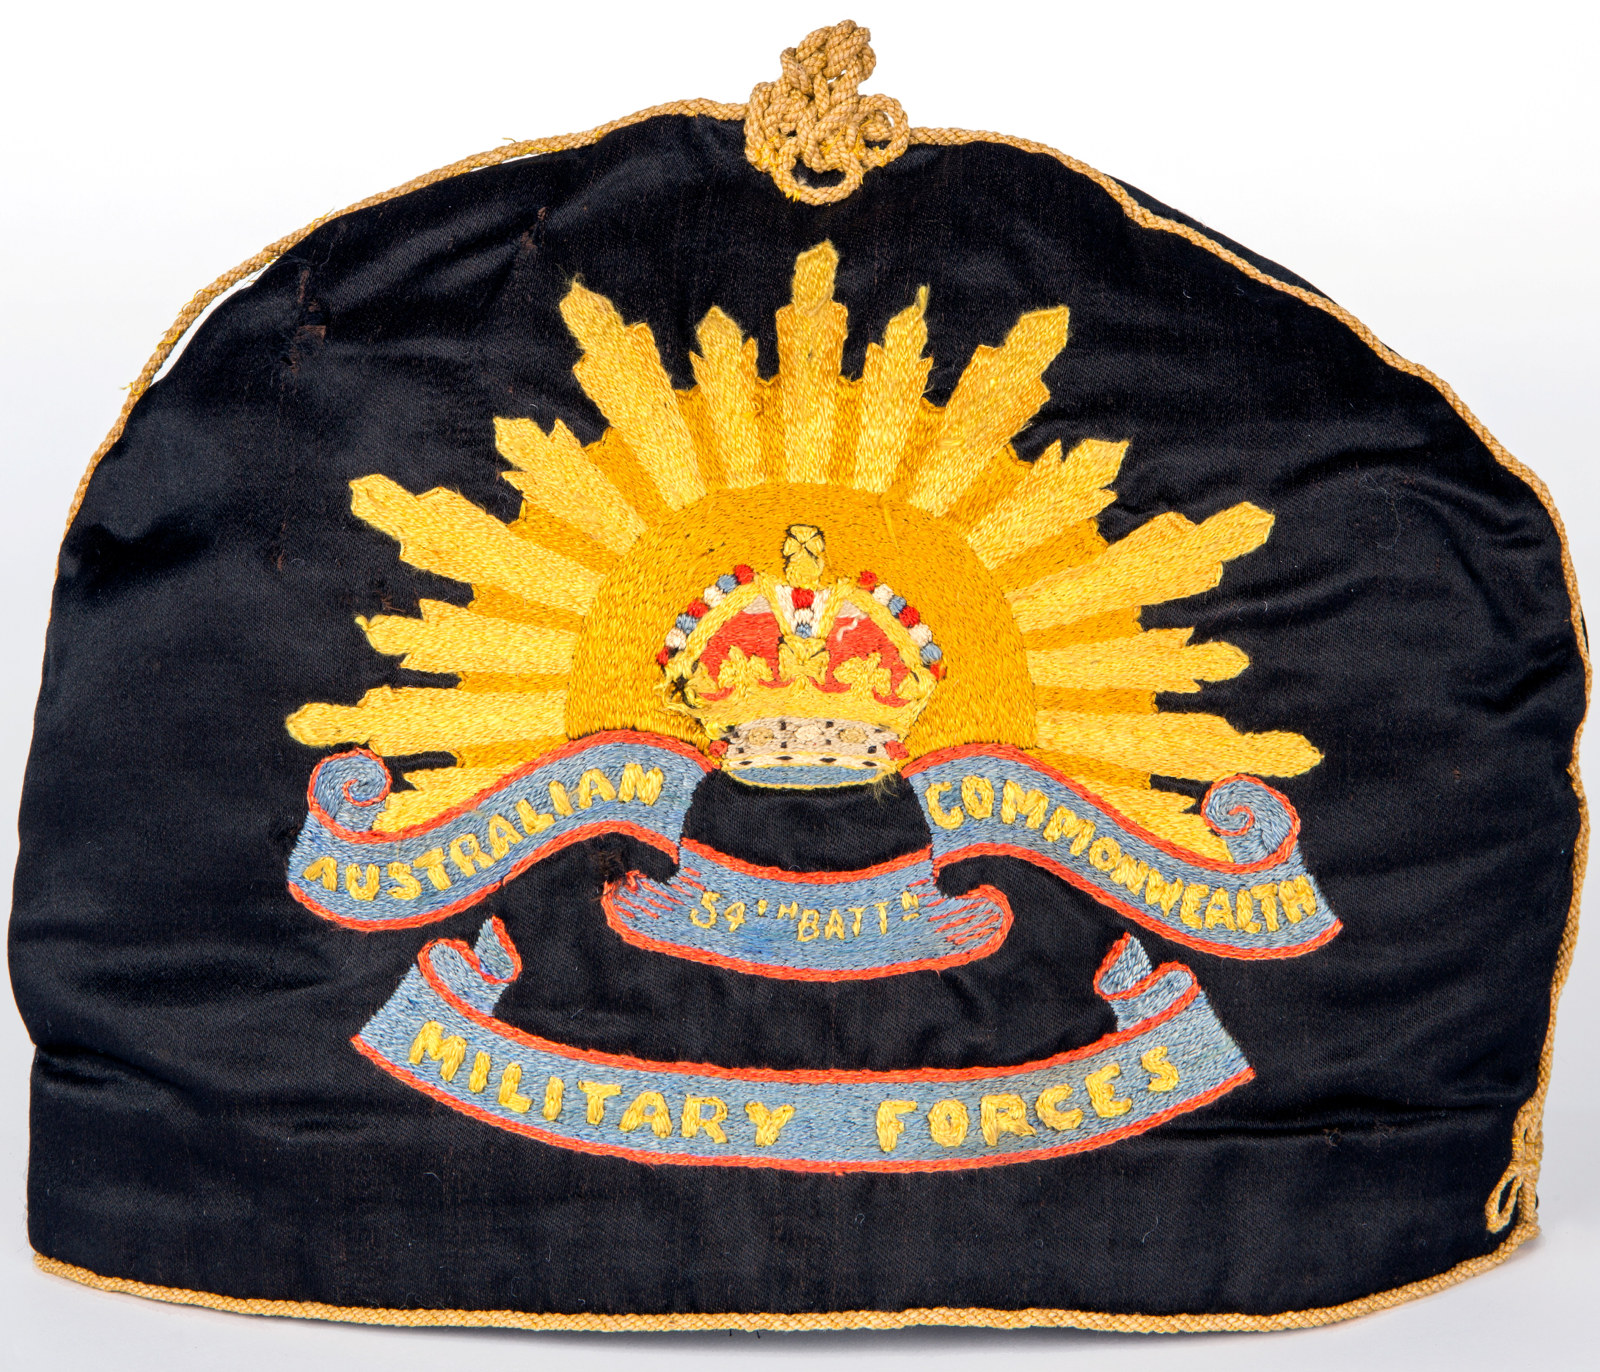 Embroidered tea cosy featuring the insignia of the Australian Commonwealth Military Forces 54th Battalion, Australia, 1914-1918